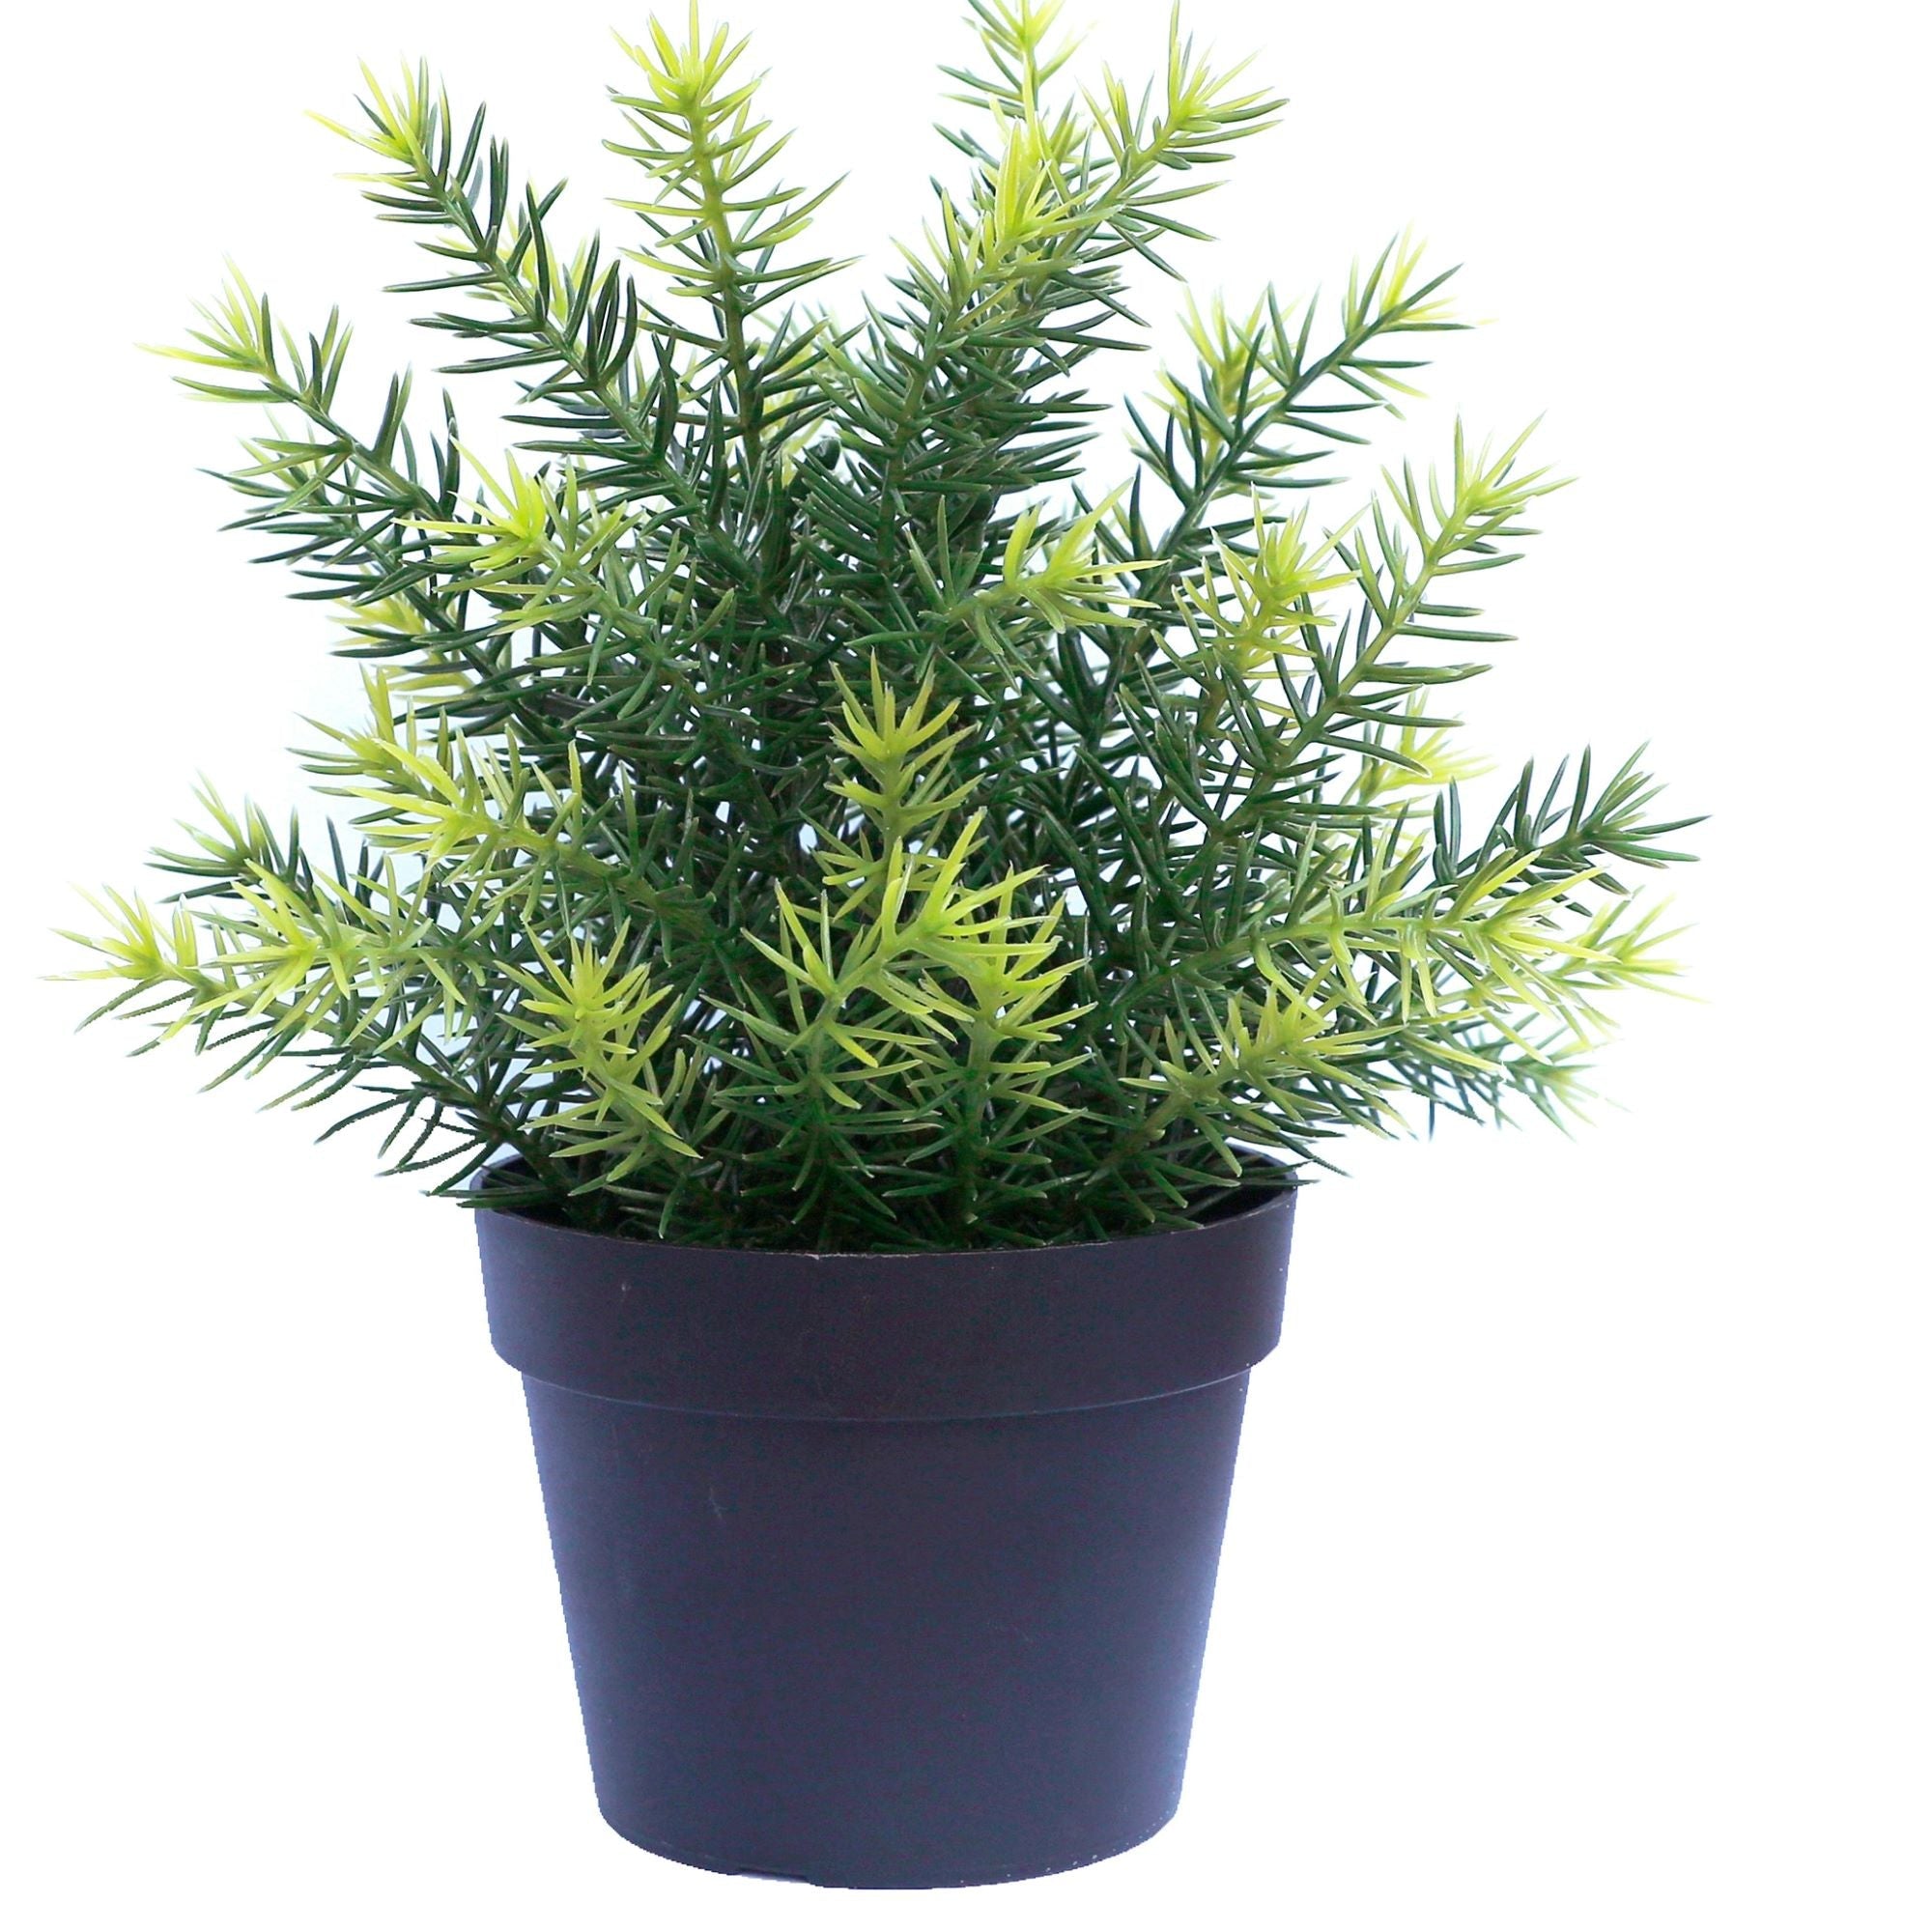 Small Potted Artificial Native Grass Plant UV Resistant 20cm - Designer Vertical Gardens Artificial Shrubs and Small plants